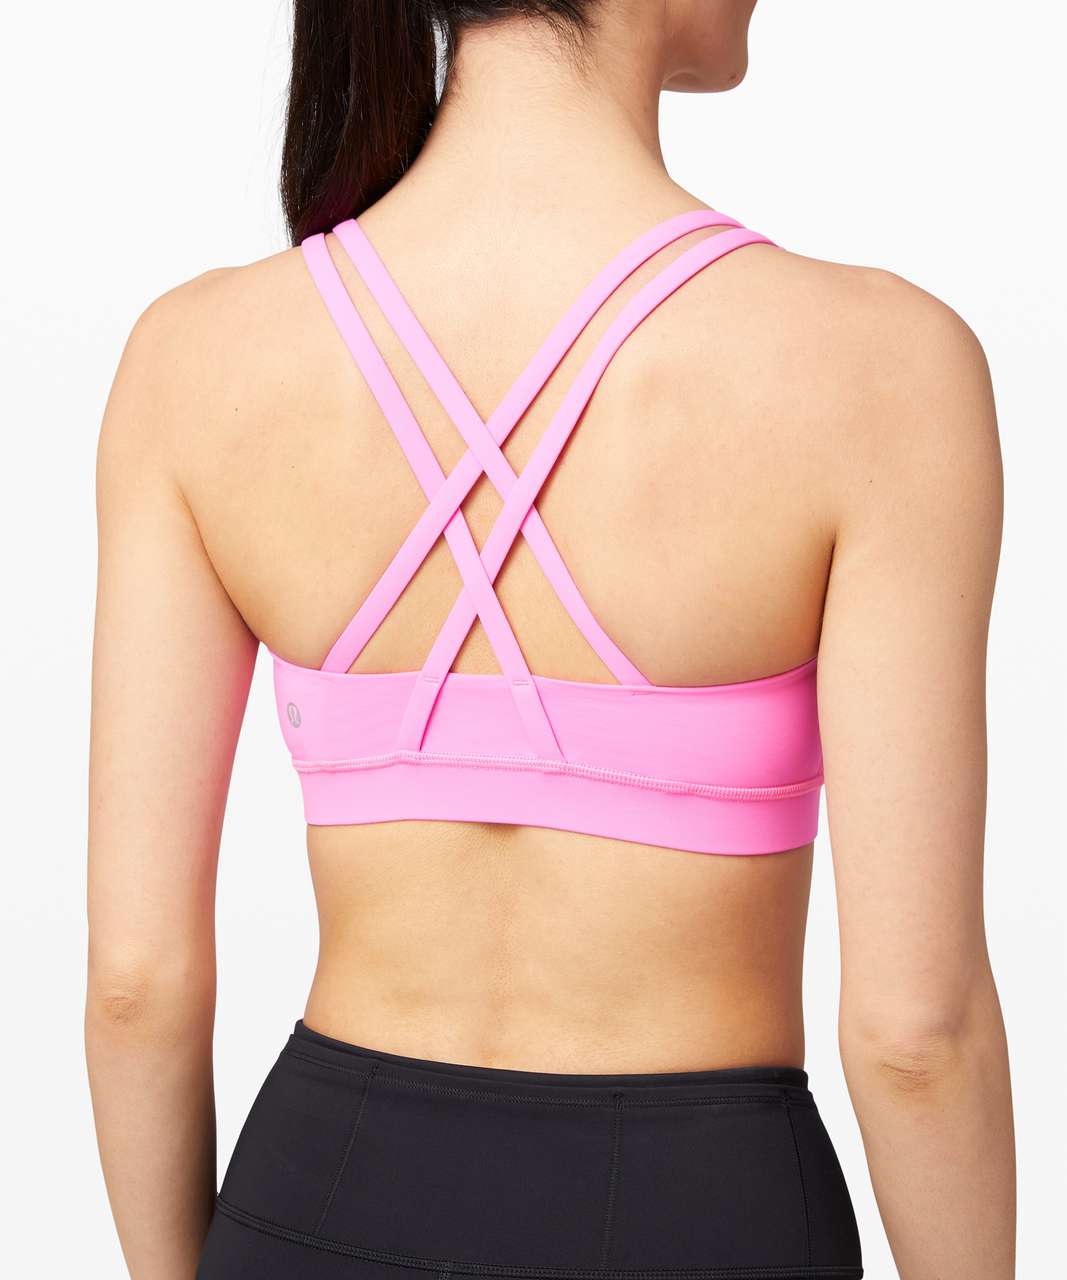 Lululemon Sports Bra Size 36 D. Pink And Some Darker Discoloration